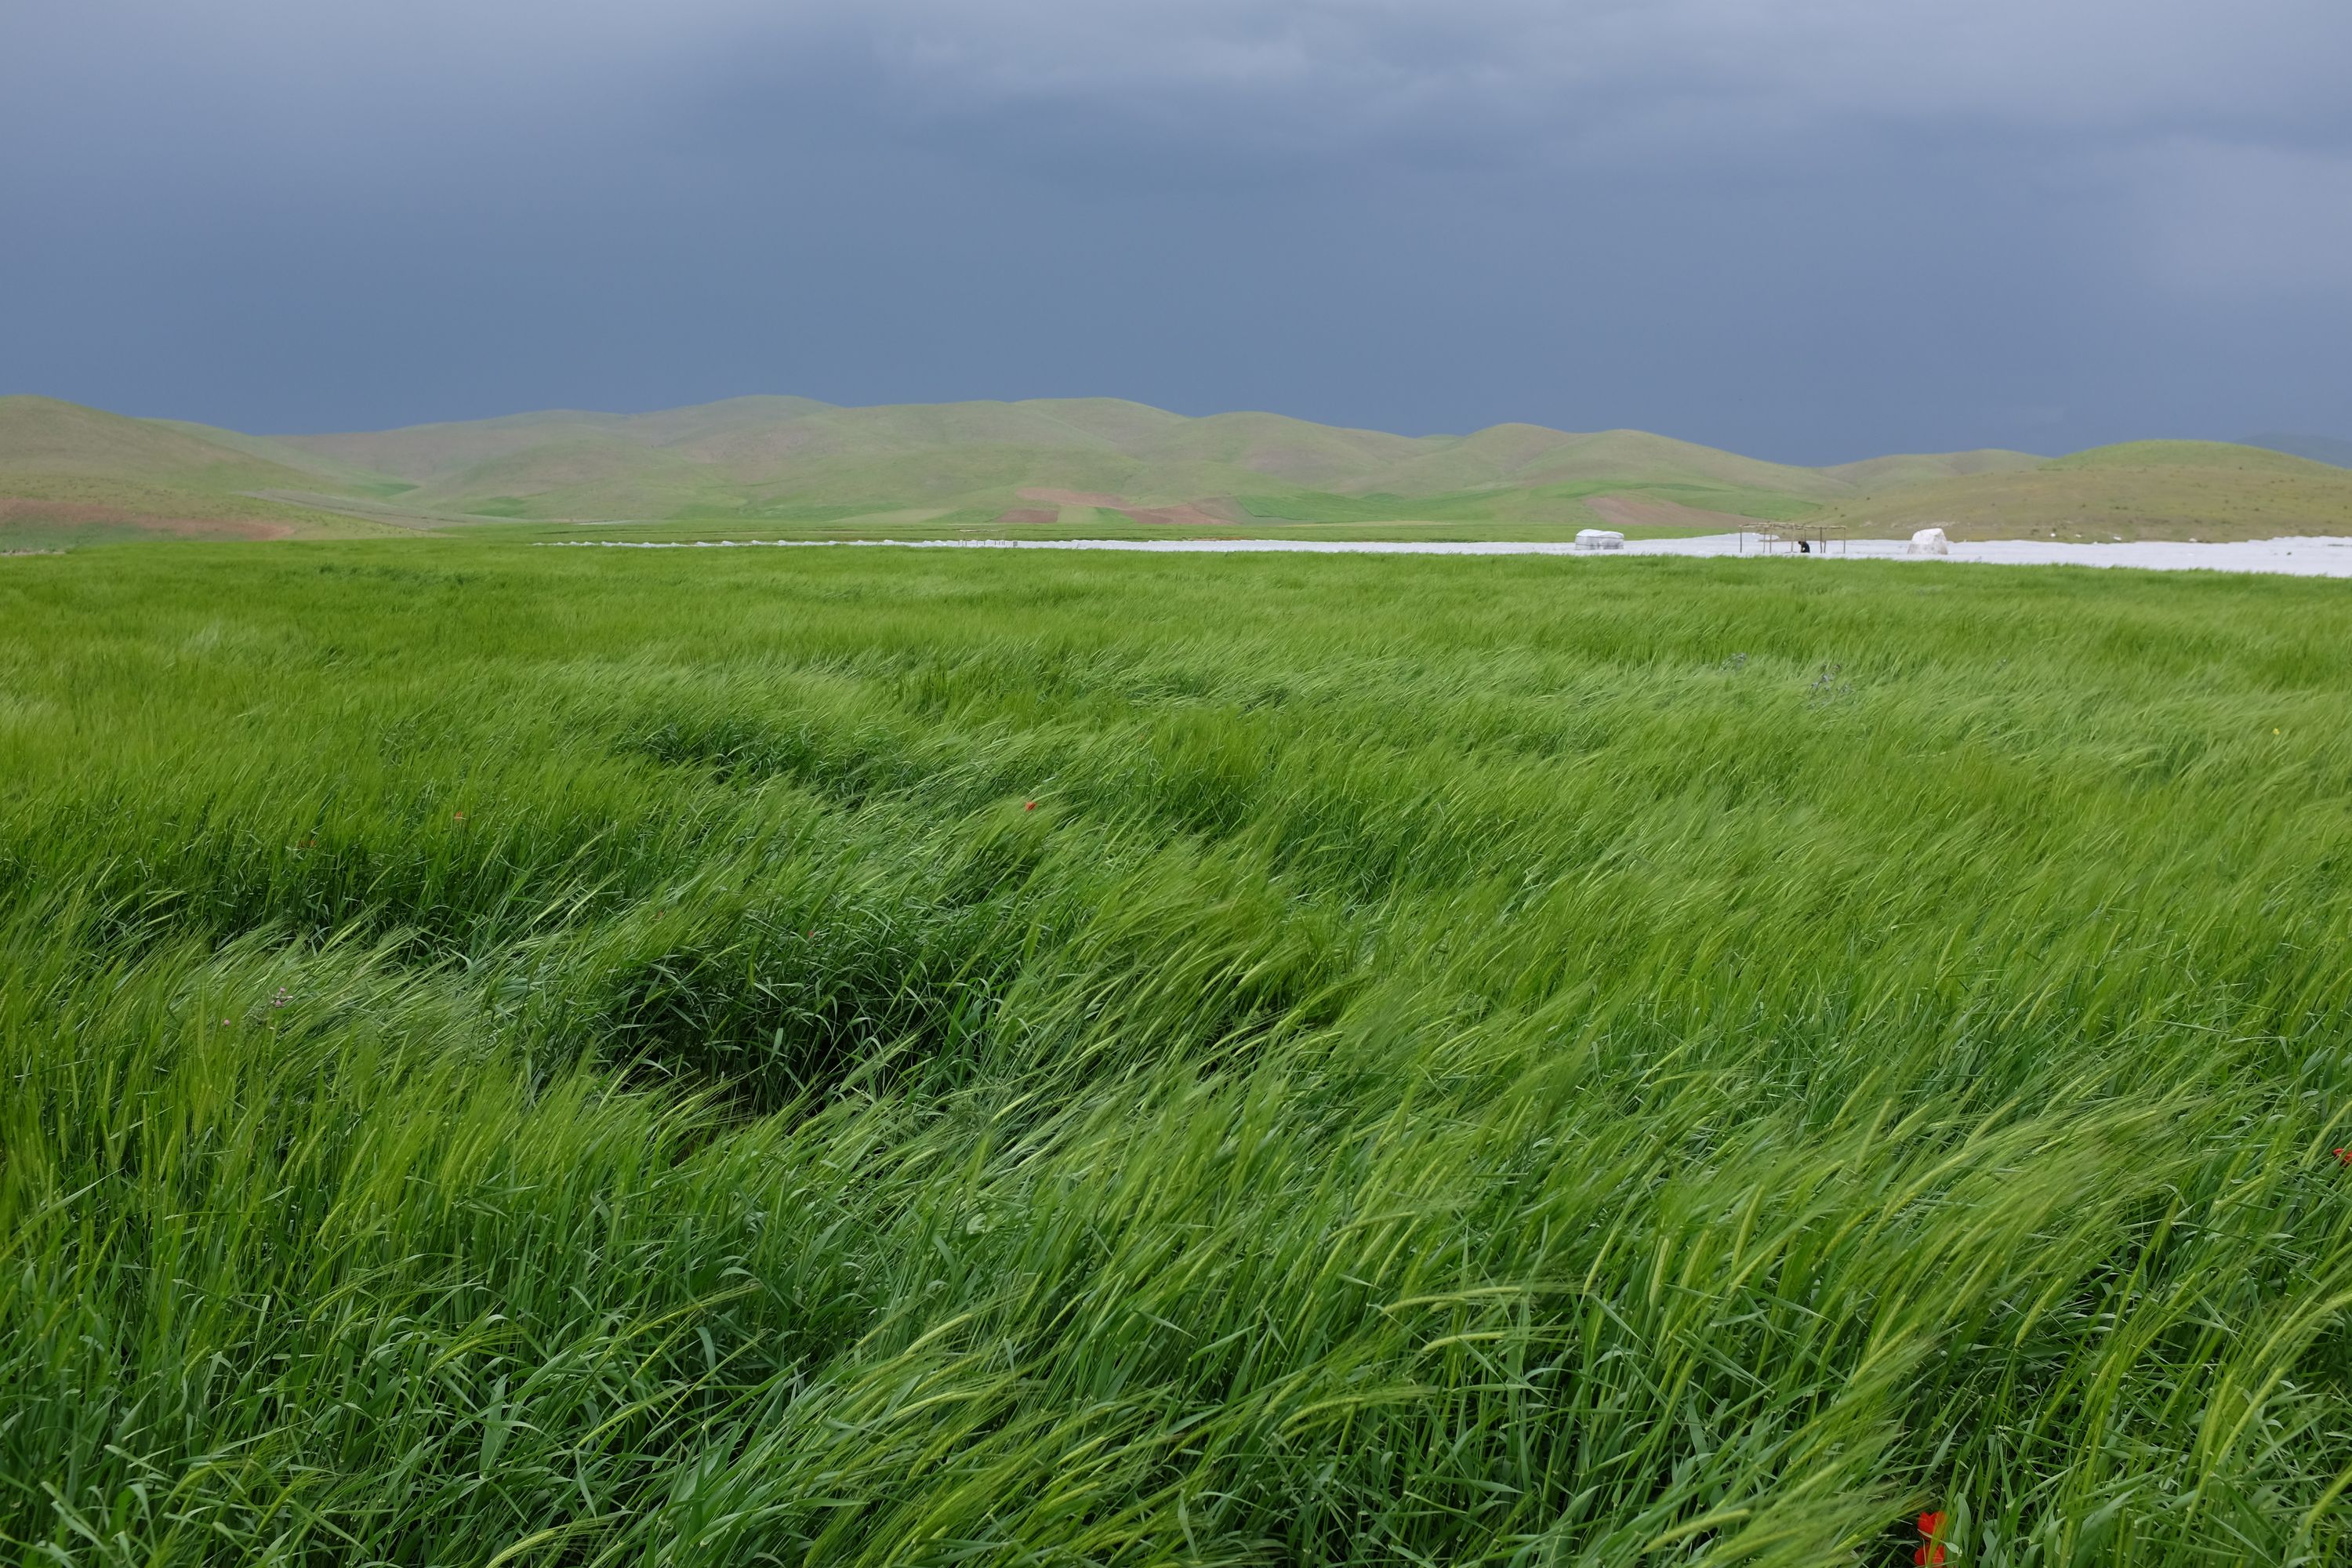 Bright green fields in what looks like strong winds under a dark grey sky.